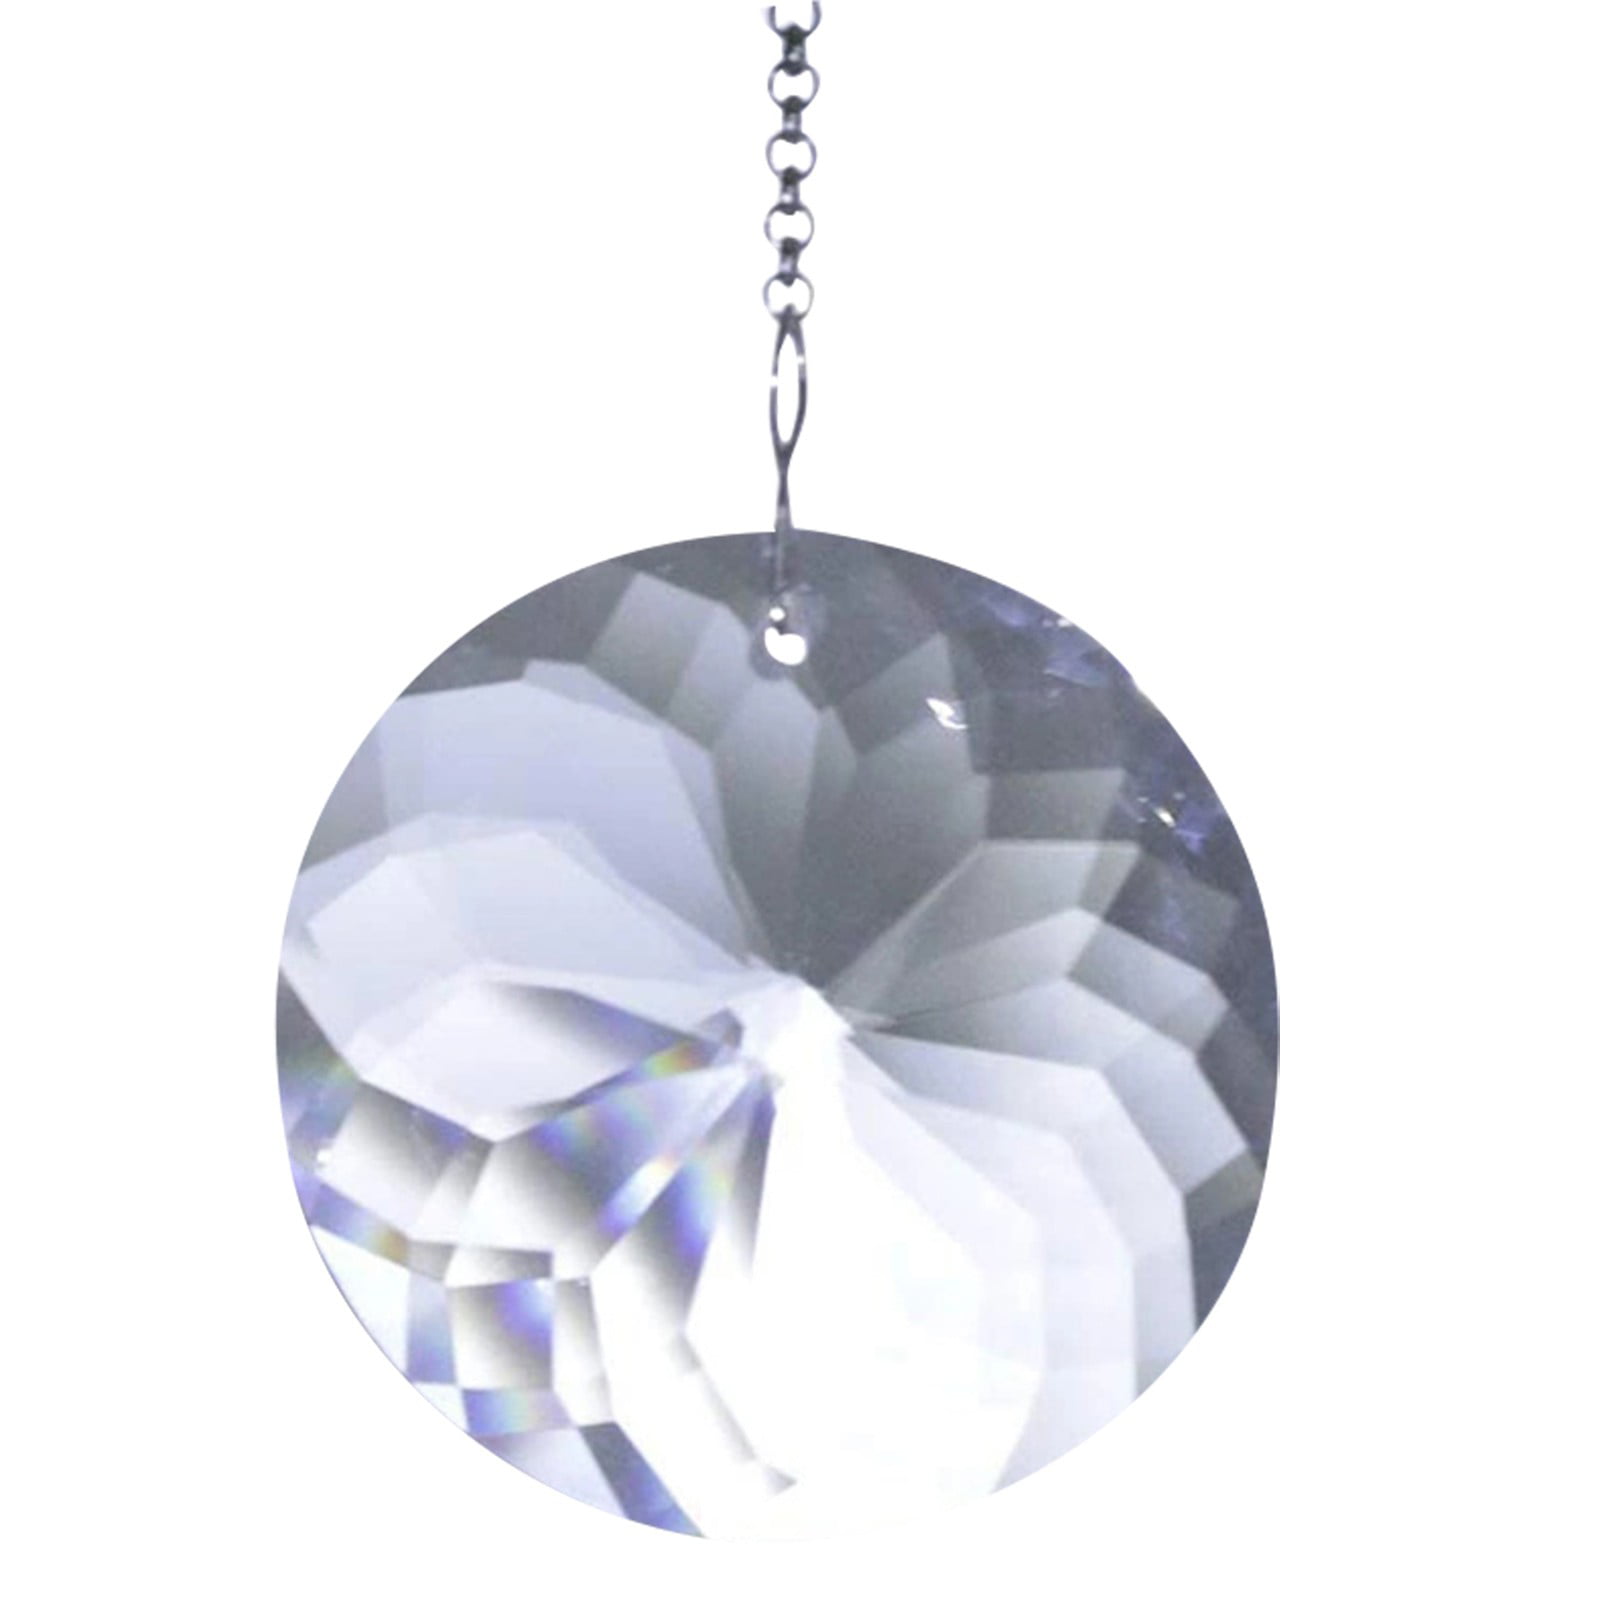 Details about   RAINBOW SUN CATCHER CRYSTAL PRISM BALL PENDANT FENG SHUI HOME WINDOW HANGING 